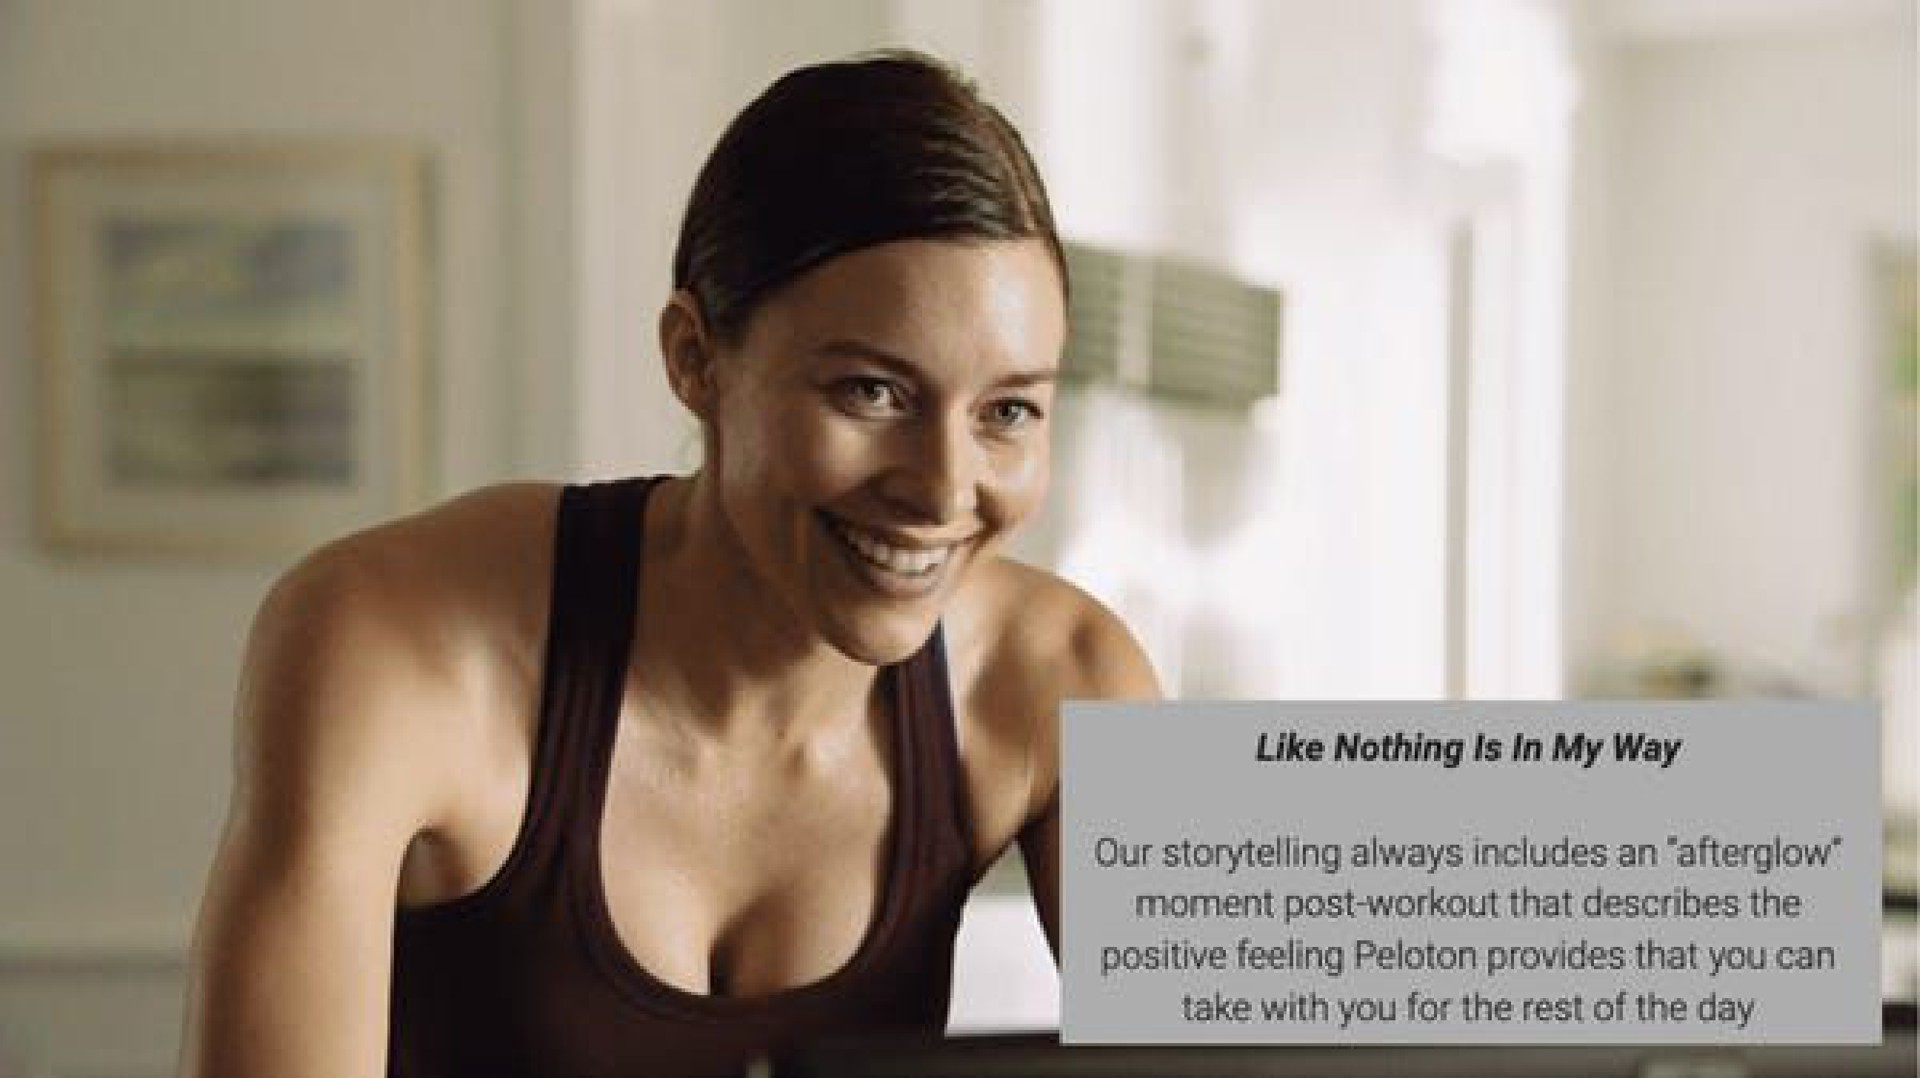 like nothing is in my way storytelling always includes an moment post workout that describes the positive feeling peloton provides that you can take with you for the rest of the day | Peloton